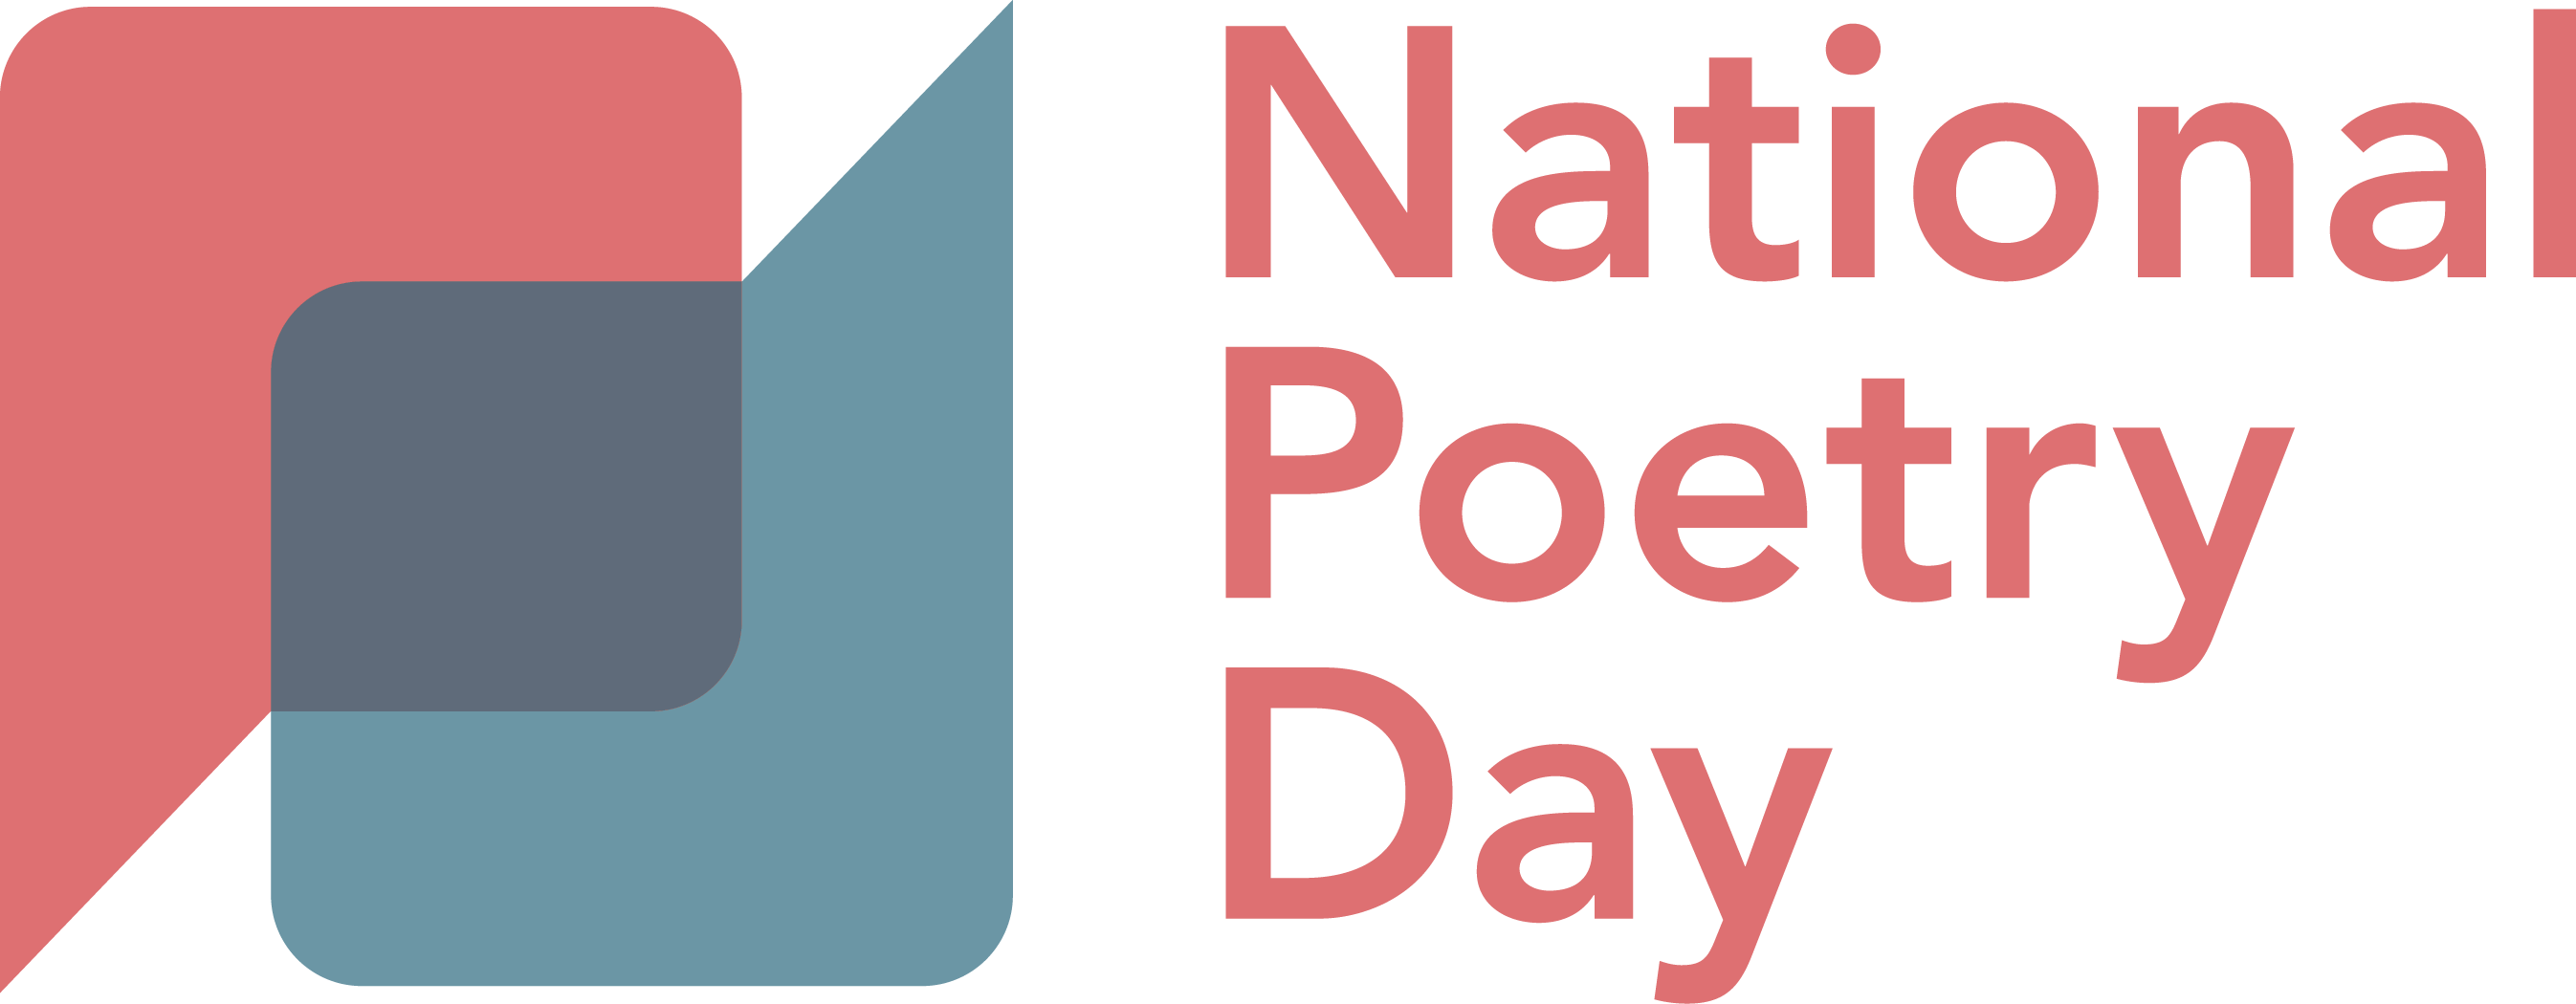 Best World Poetry Day Wish Picture And Image